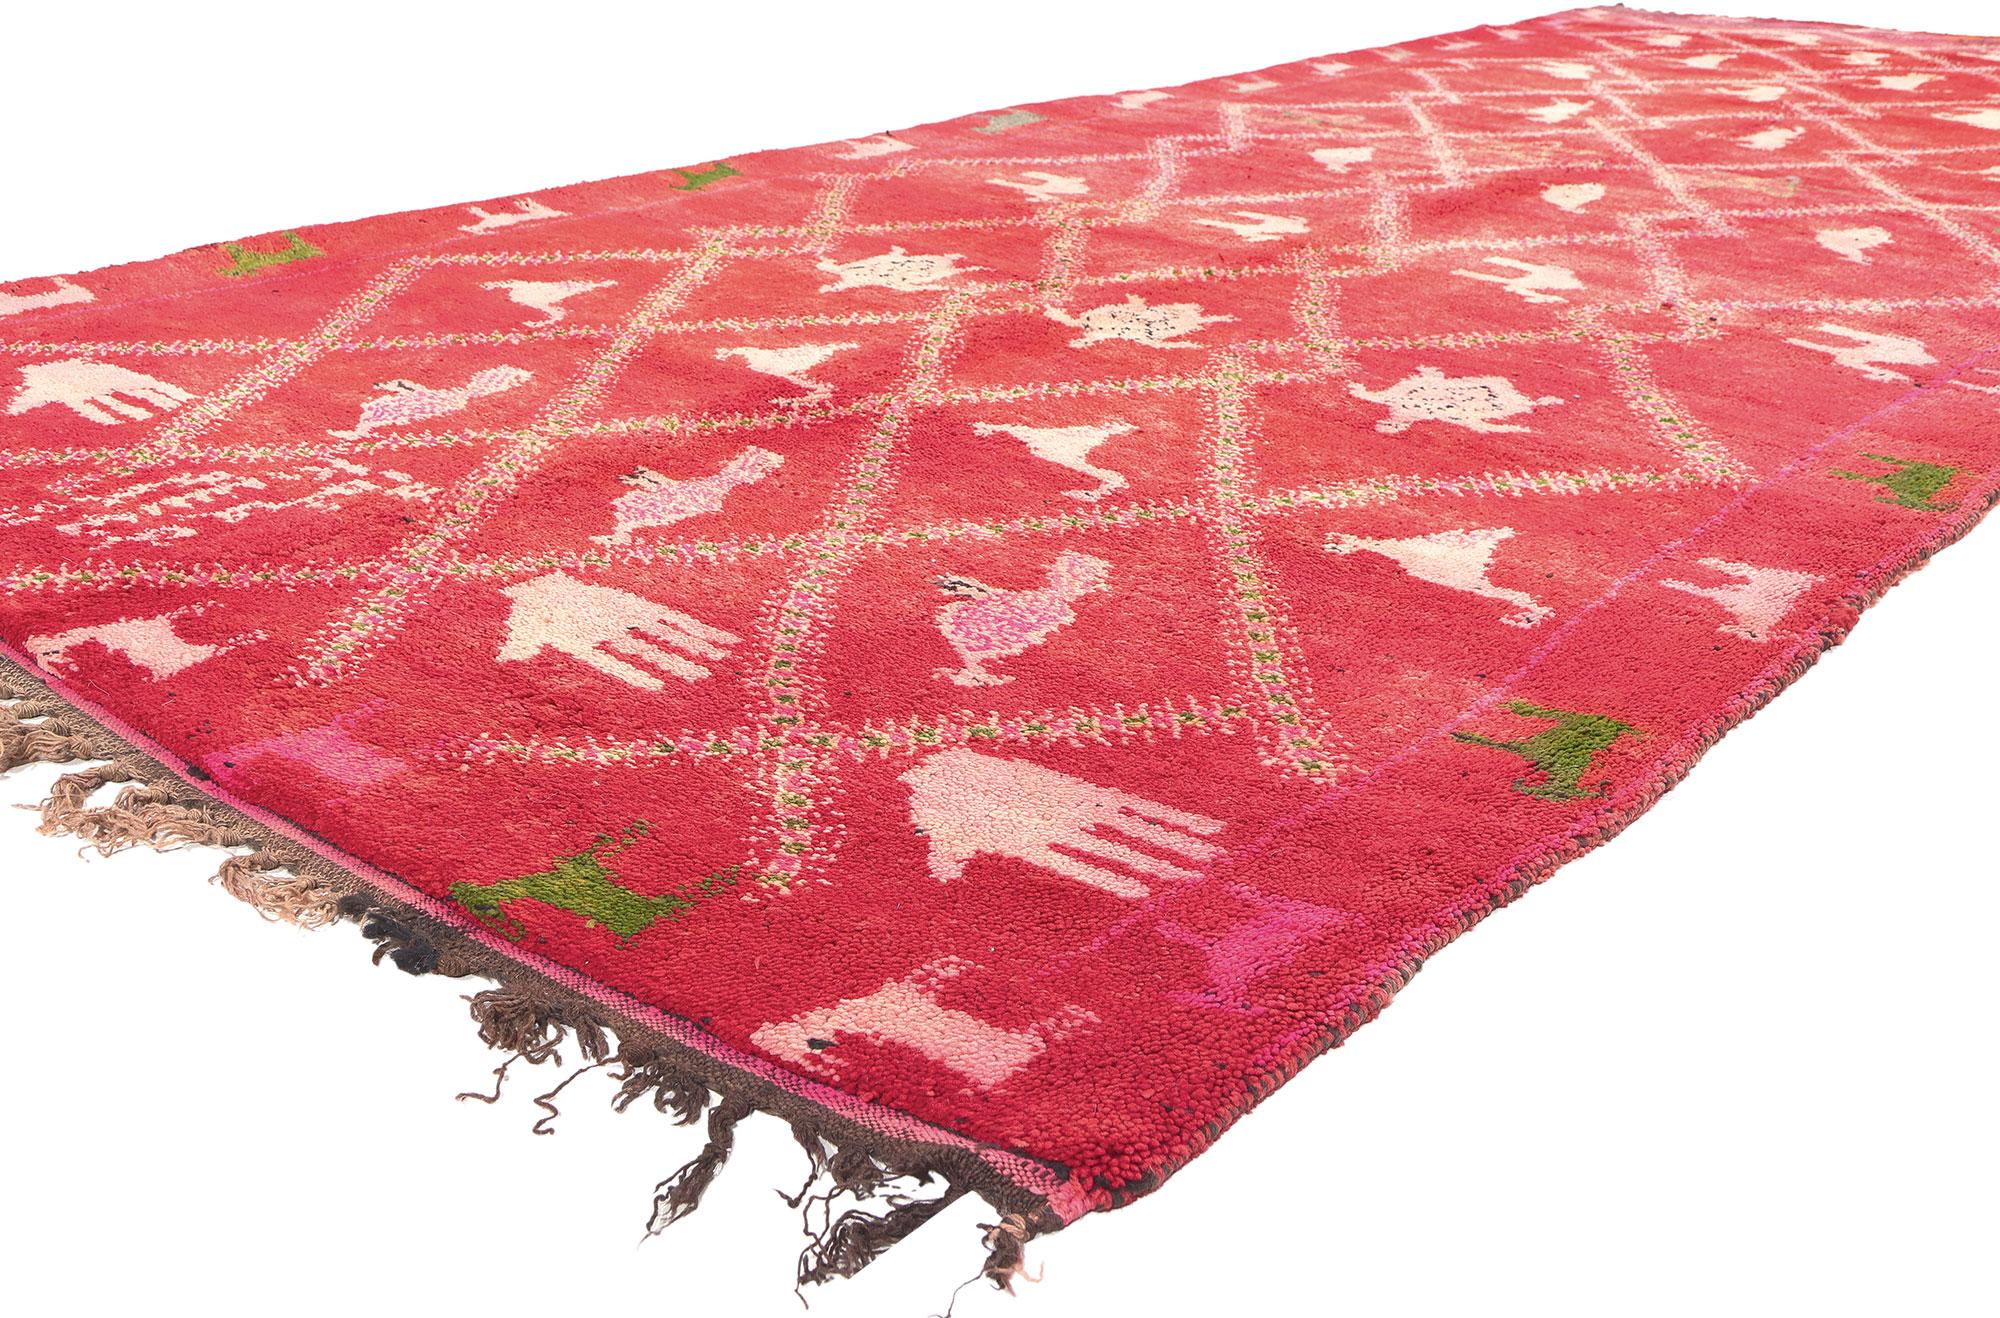 20358 Vintage Red Moroccan Rug, 06'00 x 14'05.

Immerse yourself in the captivating allure of this hand knotted wool vintage Berber red Moroccan rug, where a tapestry of animals and handprints unfolds within an enchanting lozenge trellis. The